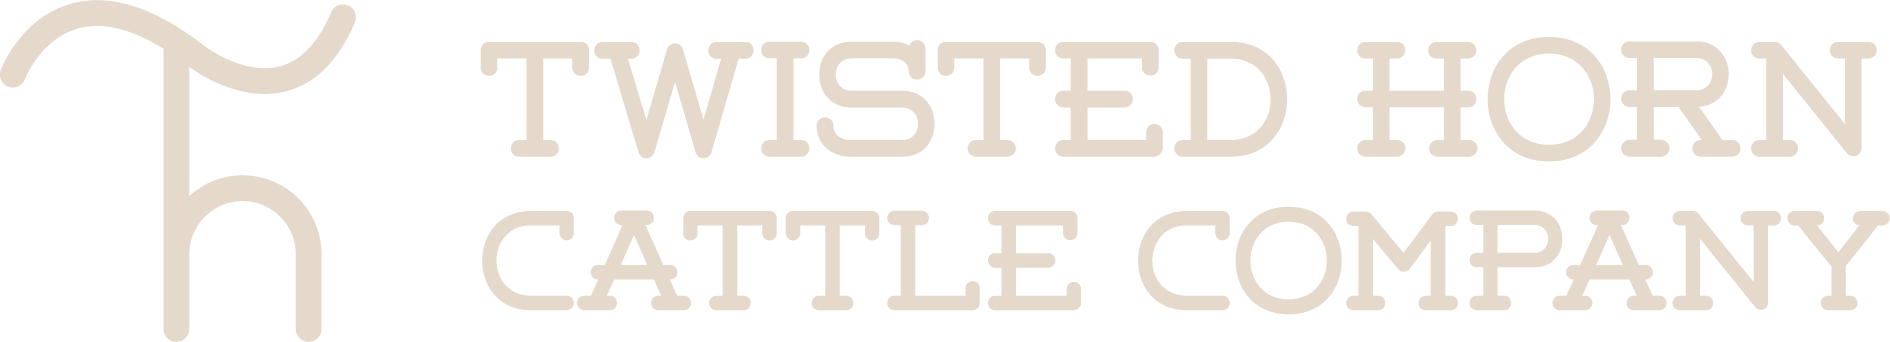 Twisted Horn Cattle Company Logo